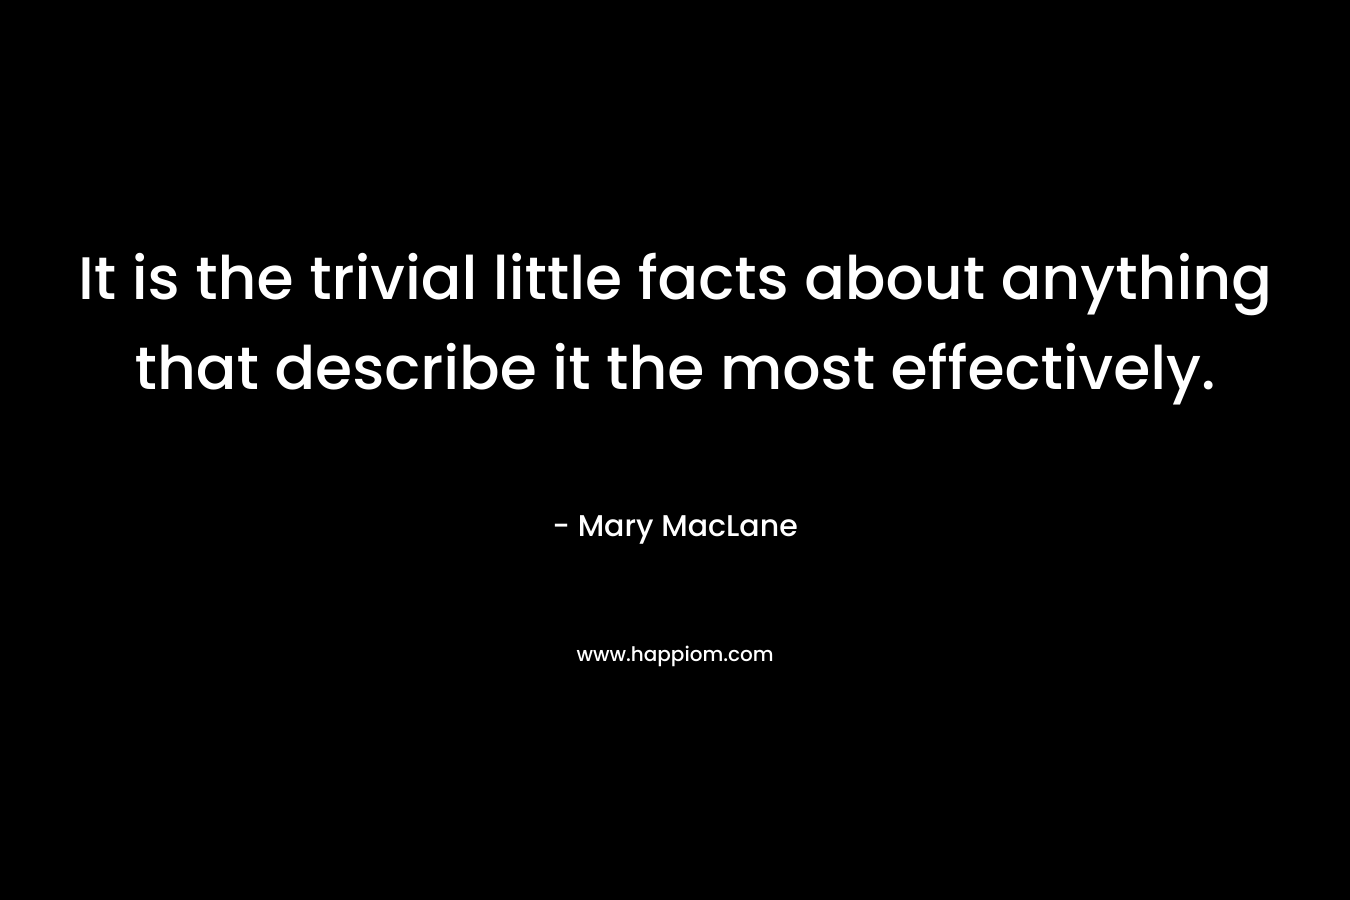 It is the trivial little facts about anything that describe it the most effectively.